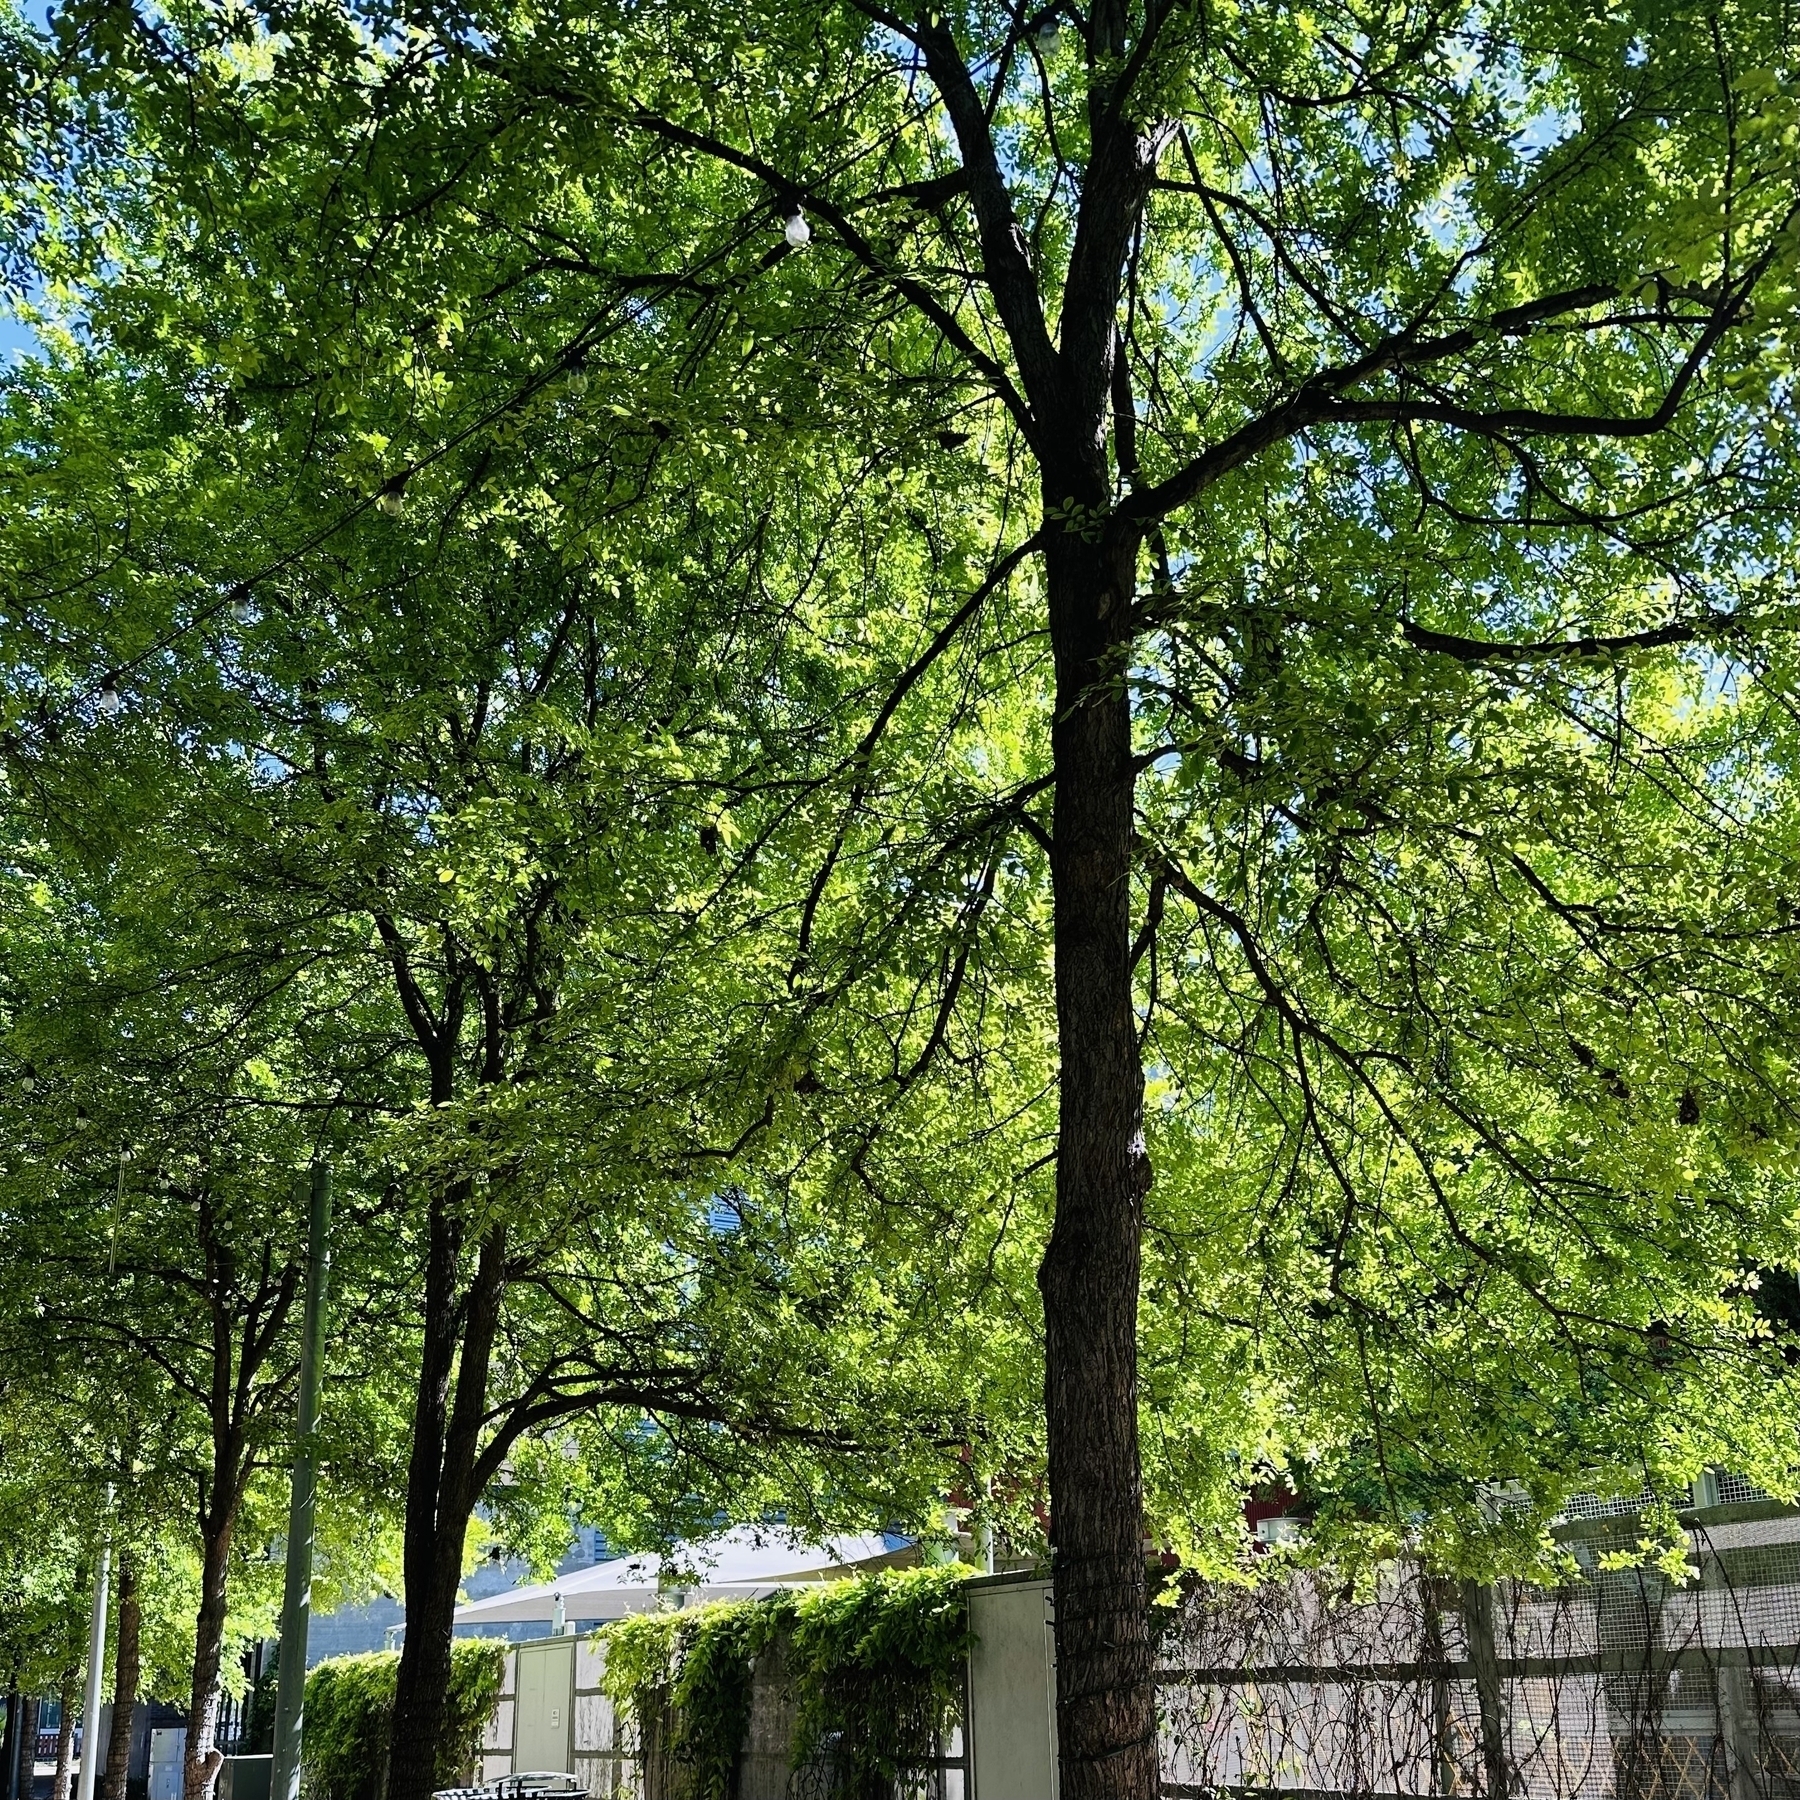 Trees with green leaves along a walkway with wall.